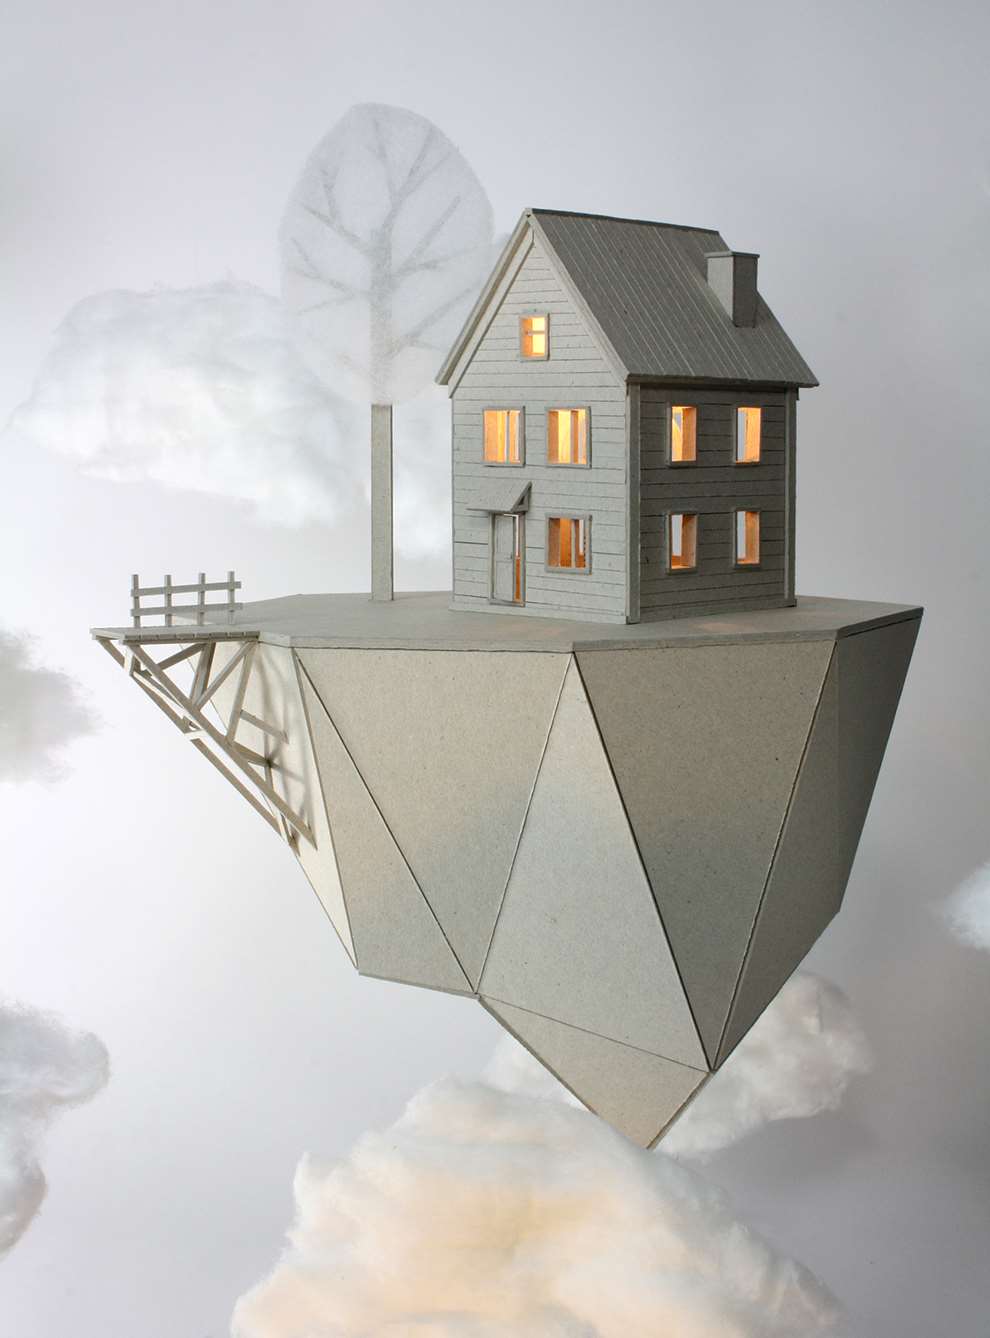 Vera Van Wolferen, Intricate cardboard sculpture of a house floating on clouds made from cotton. Magical miniature universe. Stopmotion paper animation.